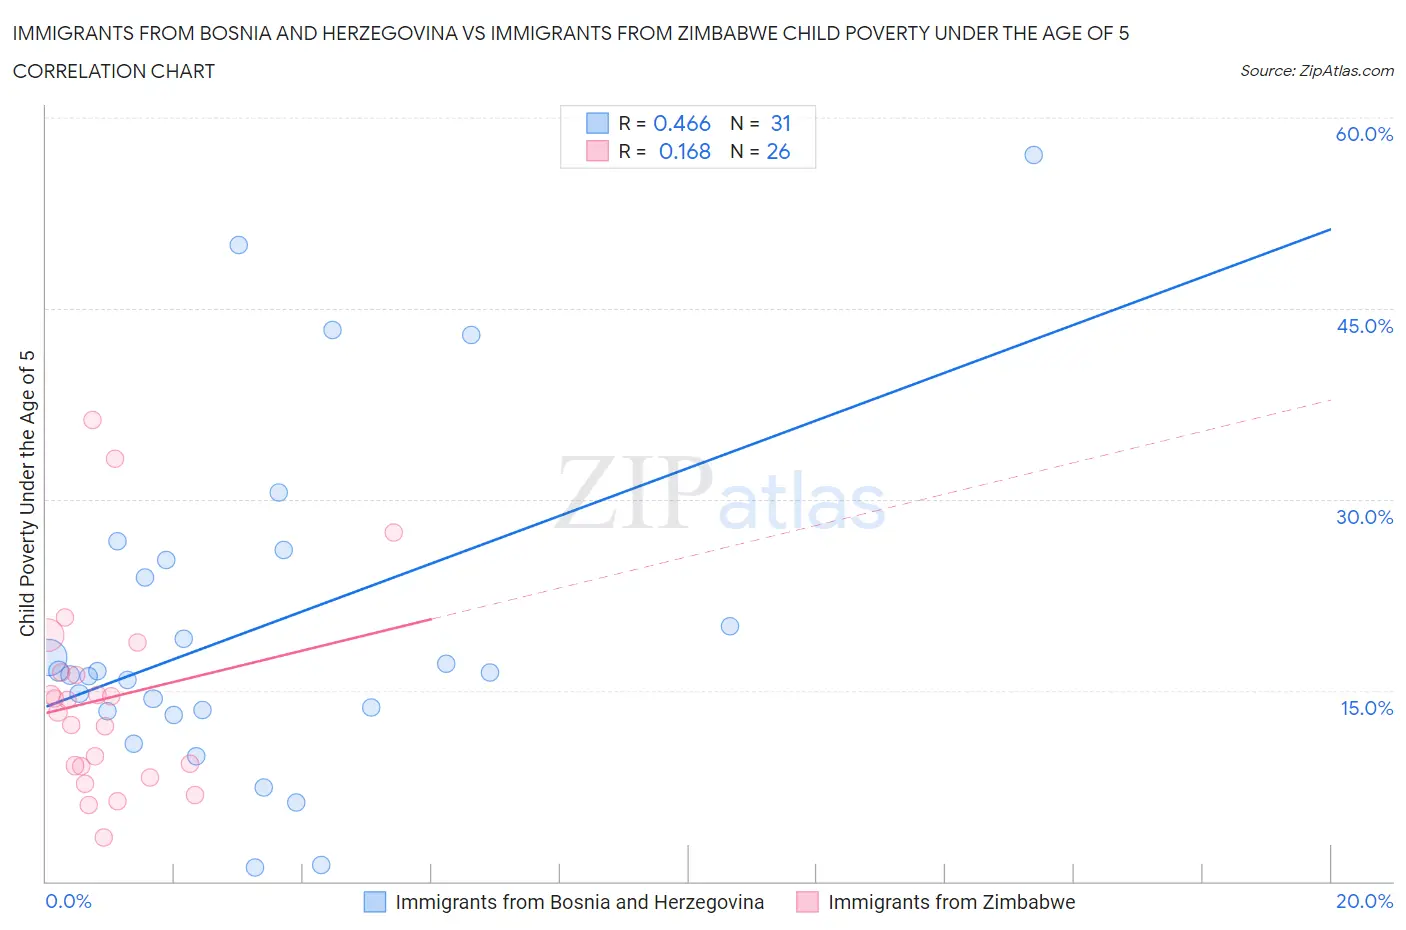 Immigrants from Bosnia and Herzegovina vs Immigrants from Zimbabwe Child Poverty Under the Age of 5